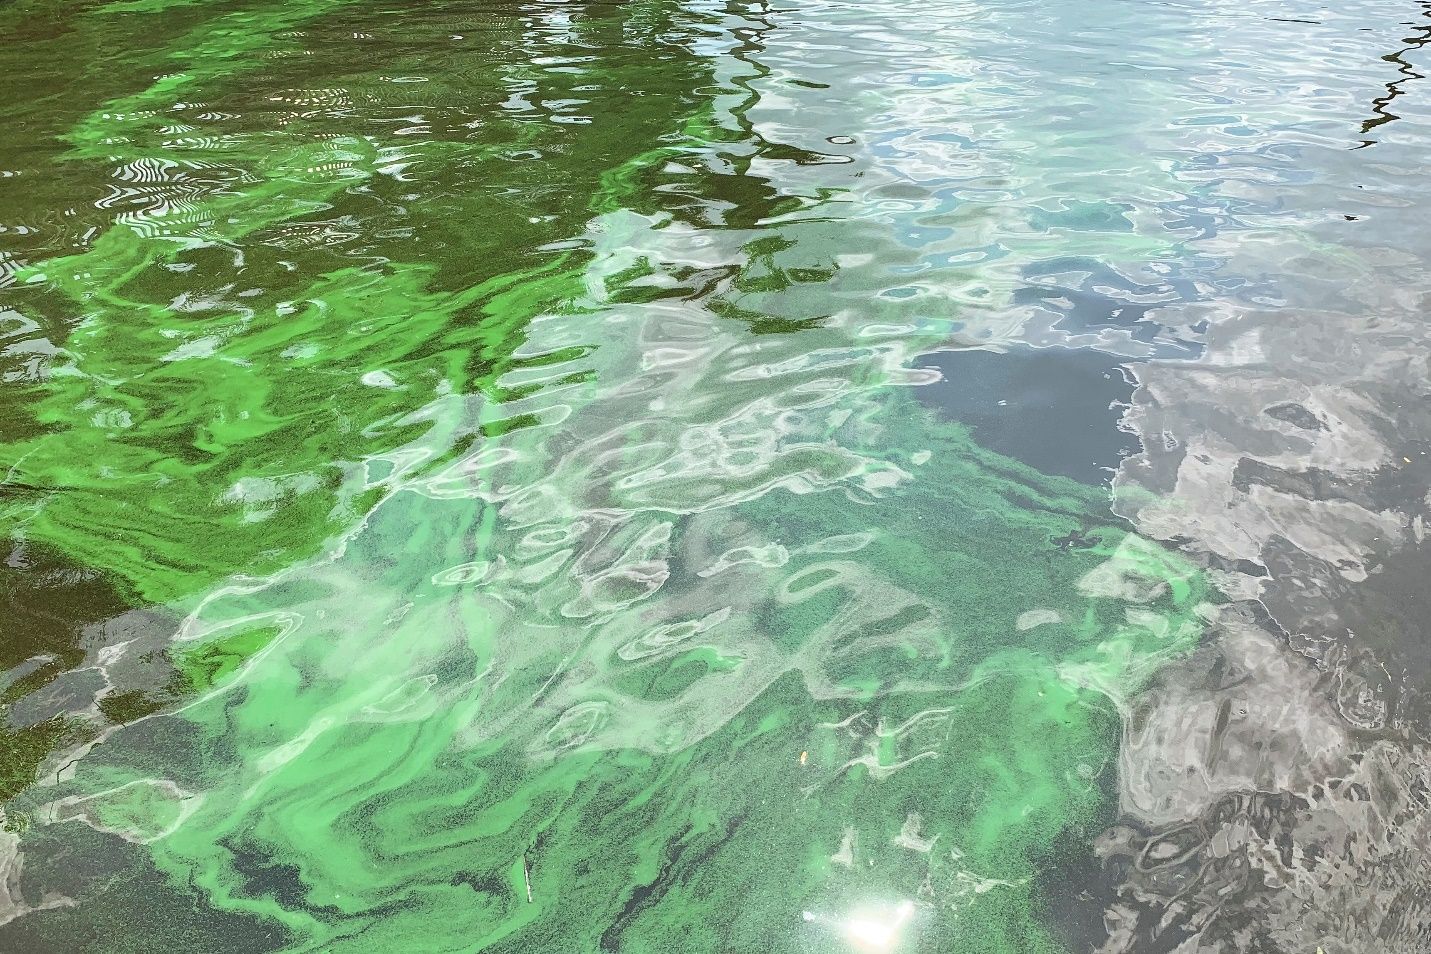 Harmful algal blooms such as this one can develop in our water bodies when excess nutrients from stormwater runoff are carried into the water. 